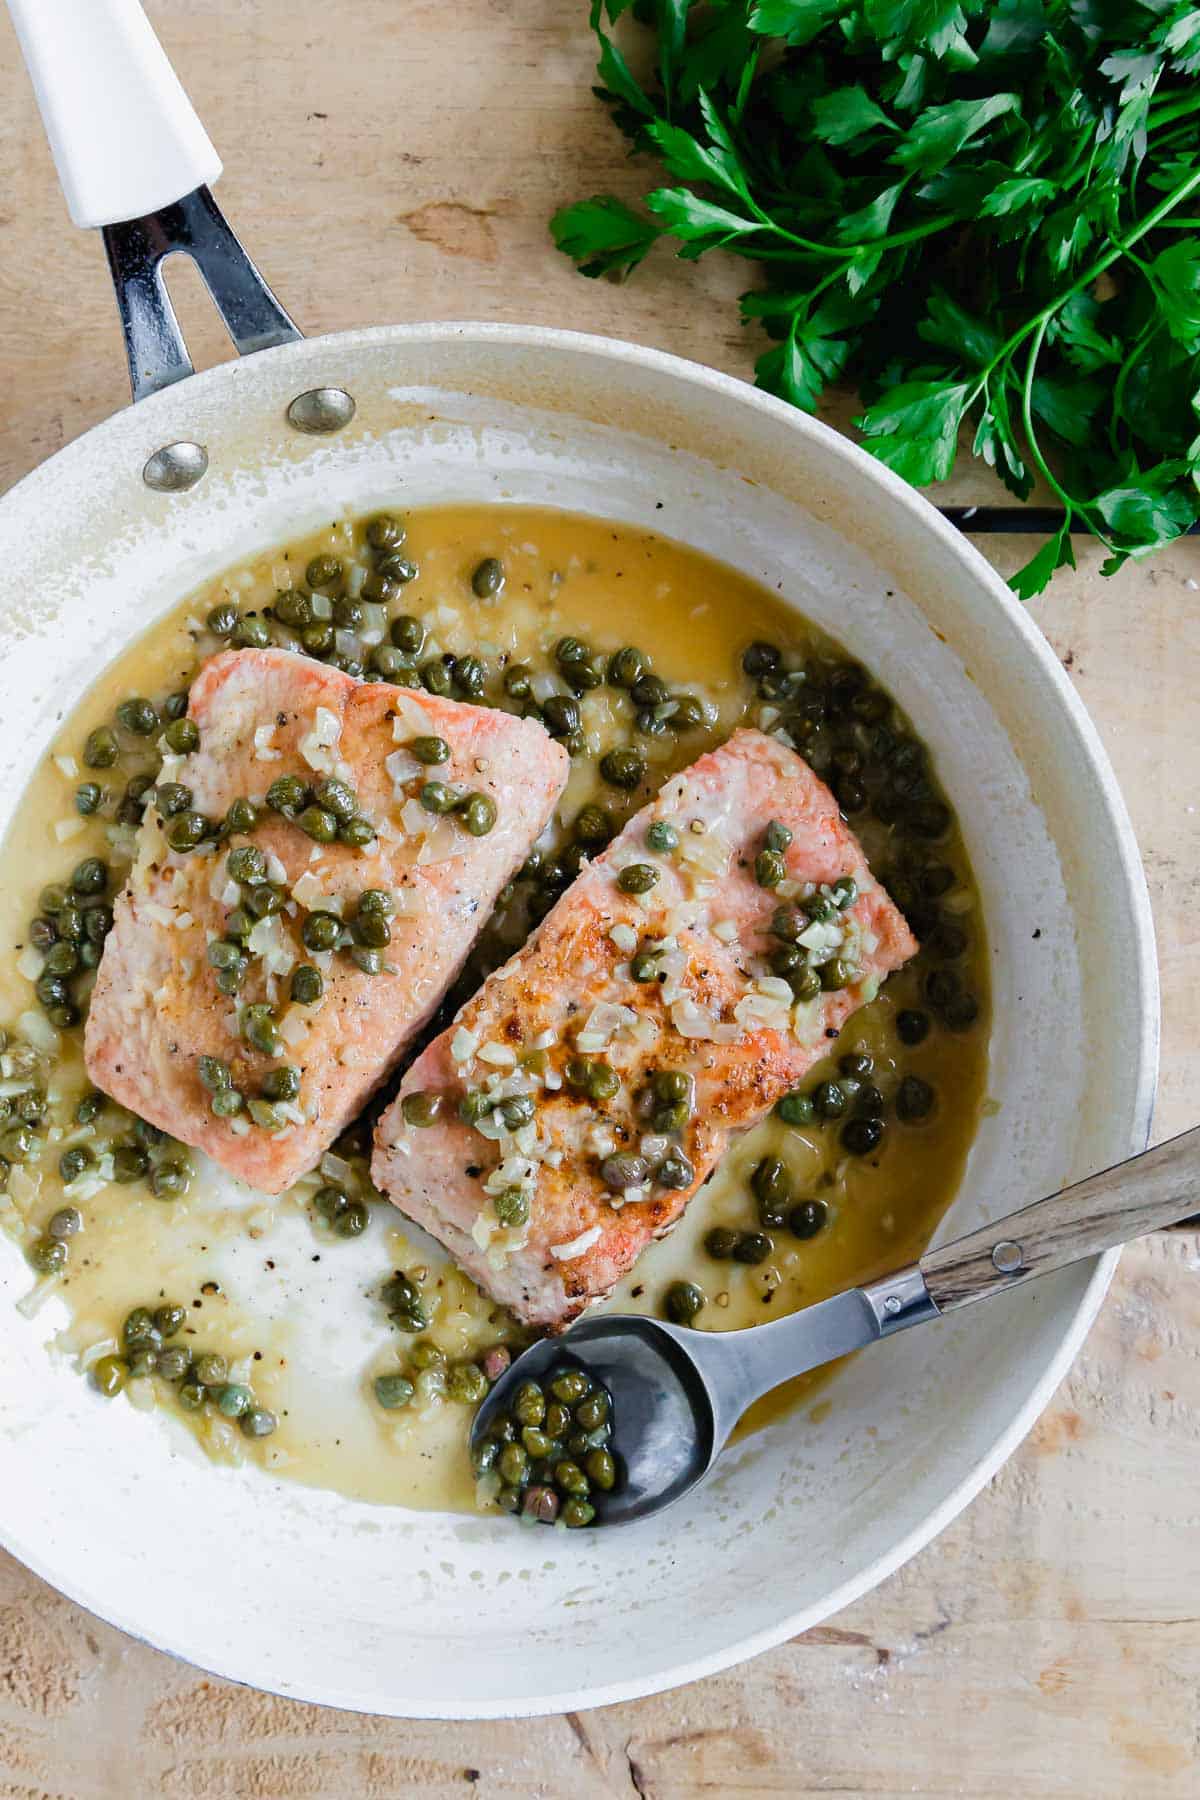 top the salmon filets with capers and shallots